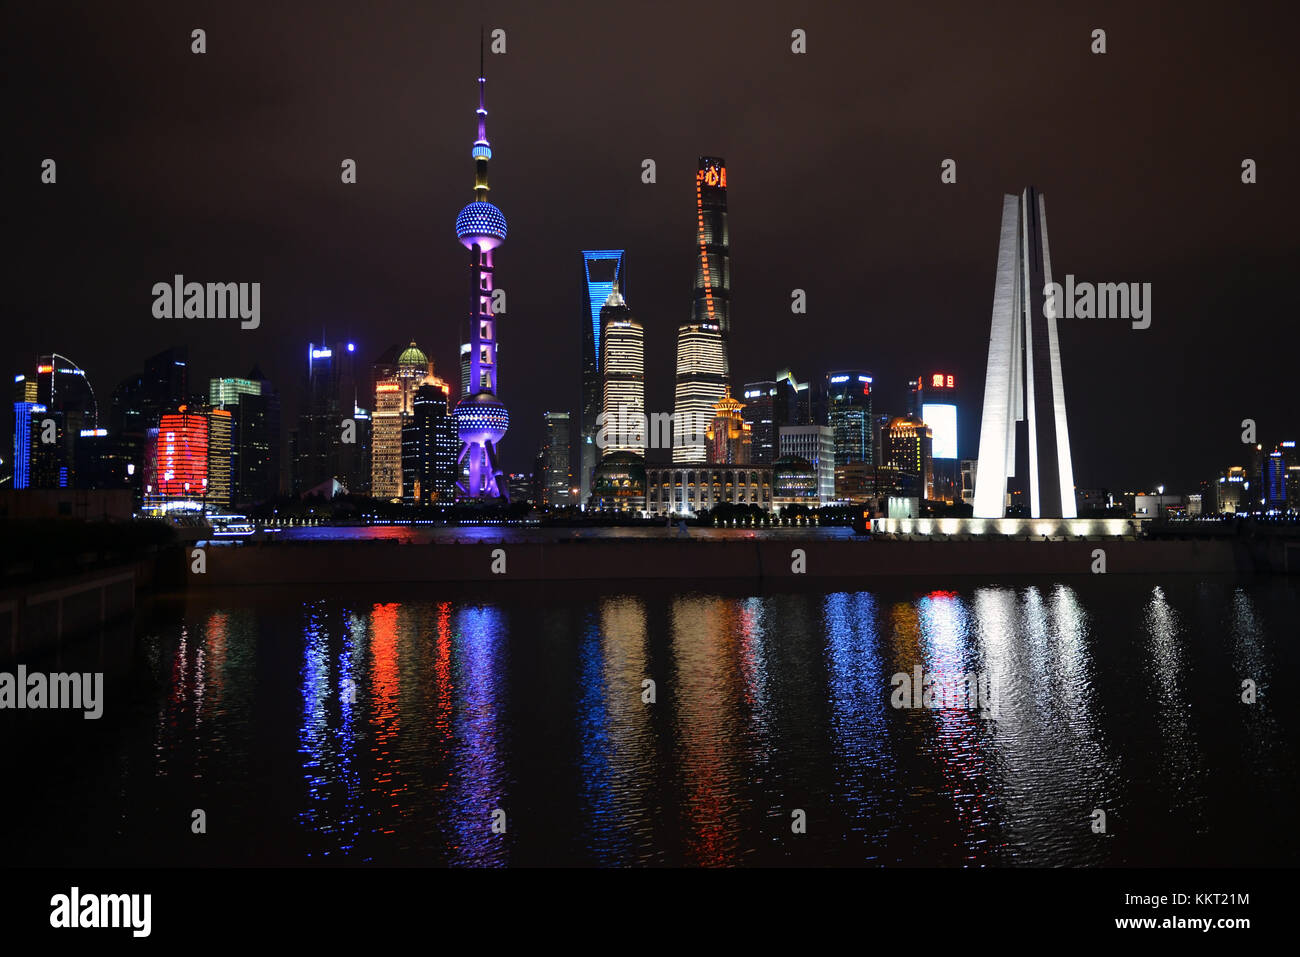 Shanghai, China - November 18, 2017:  Night shot of The Monument to the People's Heroes, left foreground, taken from The Bund with the Pudong skyline  Stock Photo